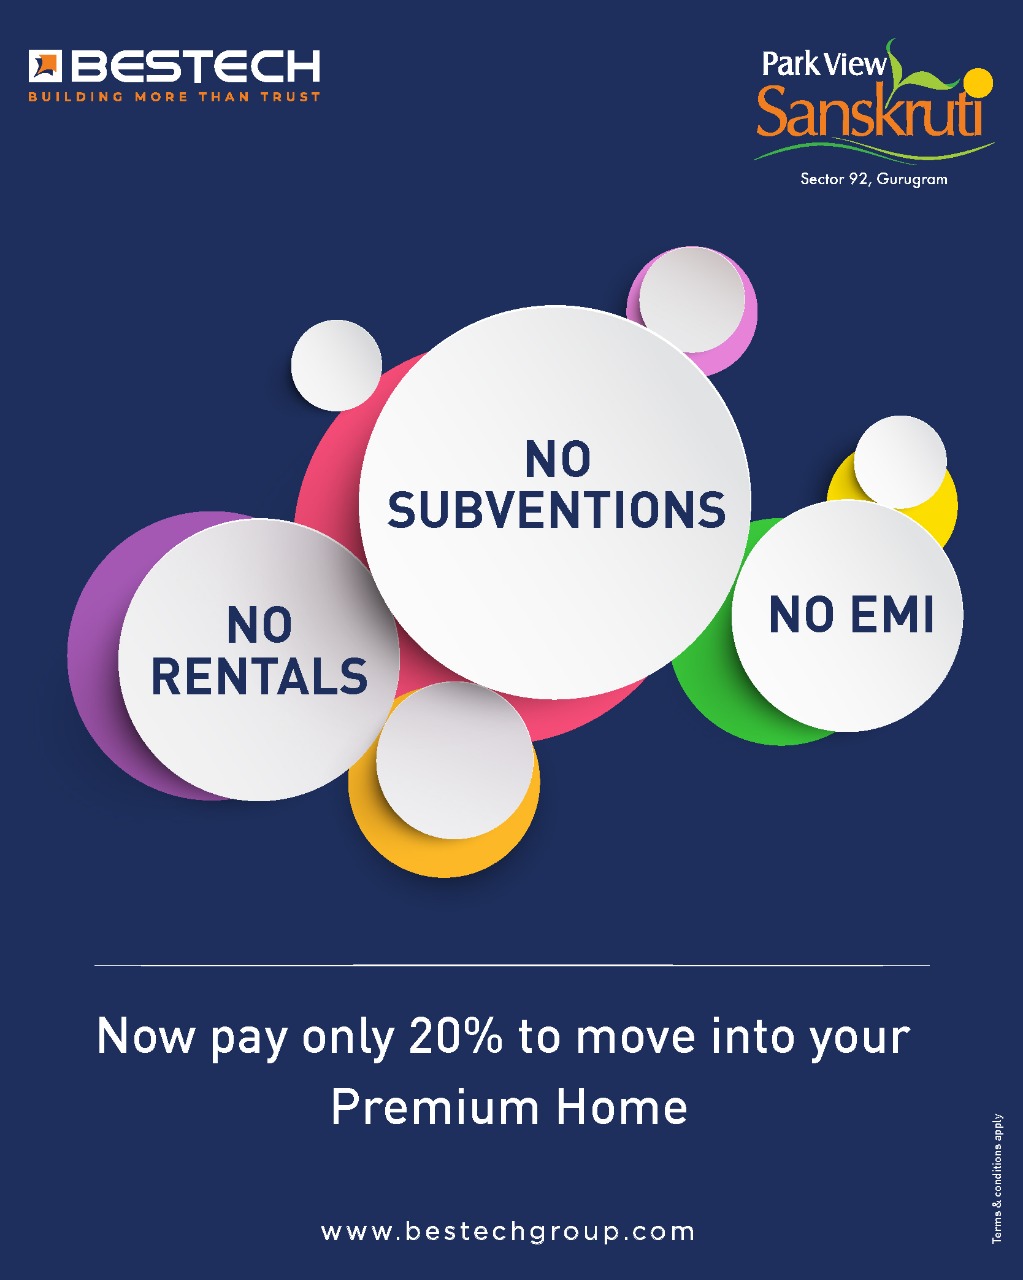 Bestech Park View Sanskruti offers easy payment plan, pay 20% and move in now Update